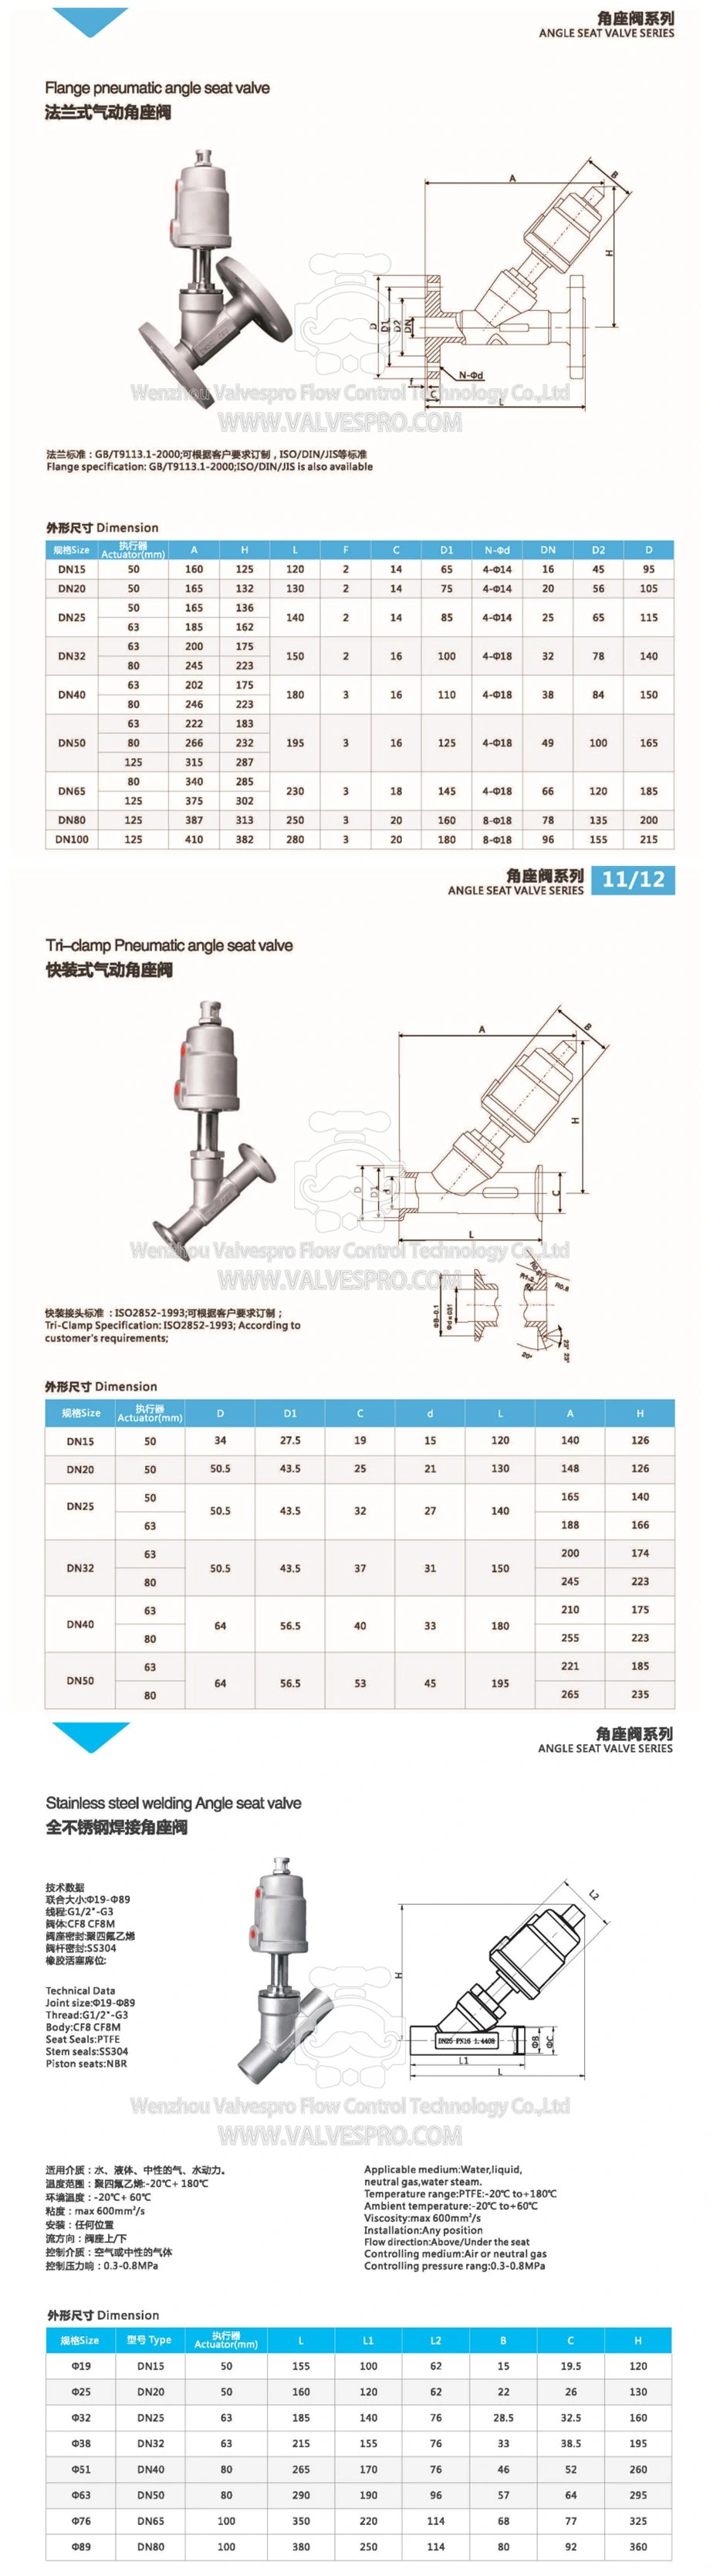 Filling Valve Angle T Type Seat Valve with Plastic Actuator, CF8 Body SS304 or SS316 CF8m DIN Flange Standard